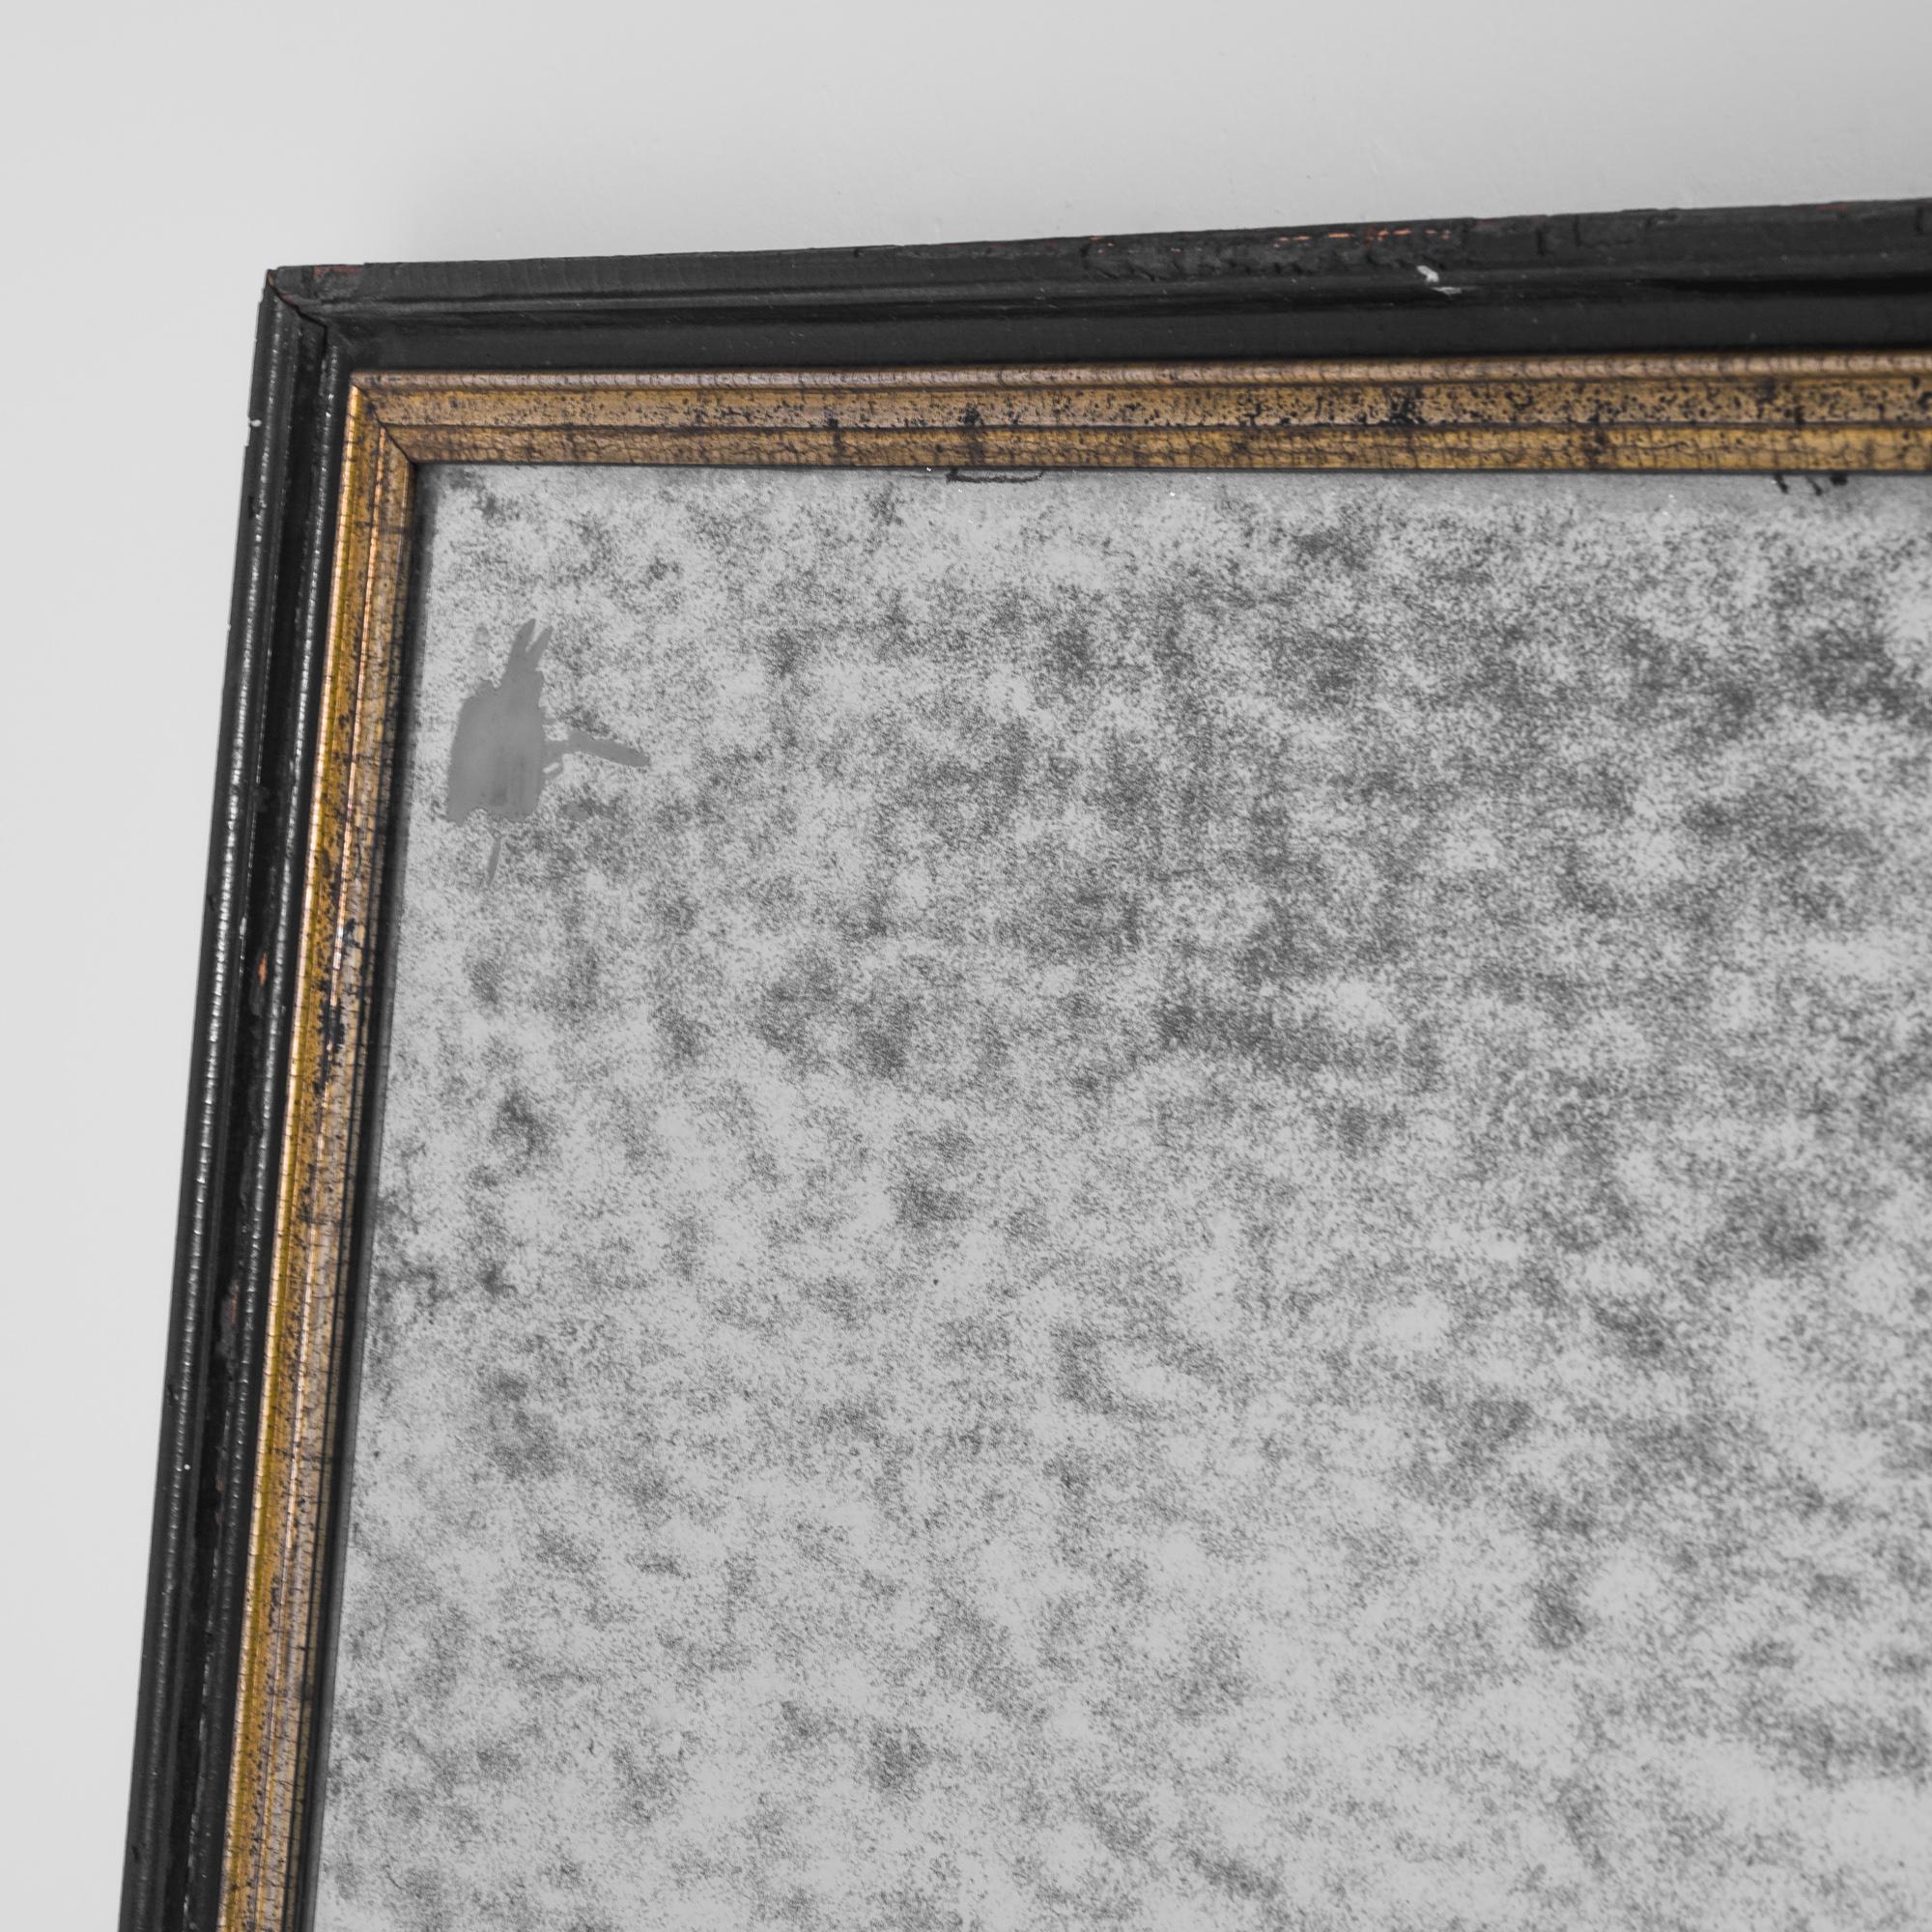 Black over gold — this looking glass, crafted in France circa 1900, features a classical black frame with a faded gold leaf adorning its inner part. The smoky texture of the surface, a graceful mark of time that adds a unique quality to this vintage